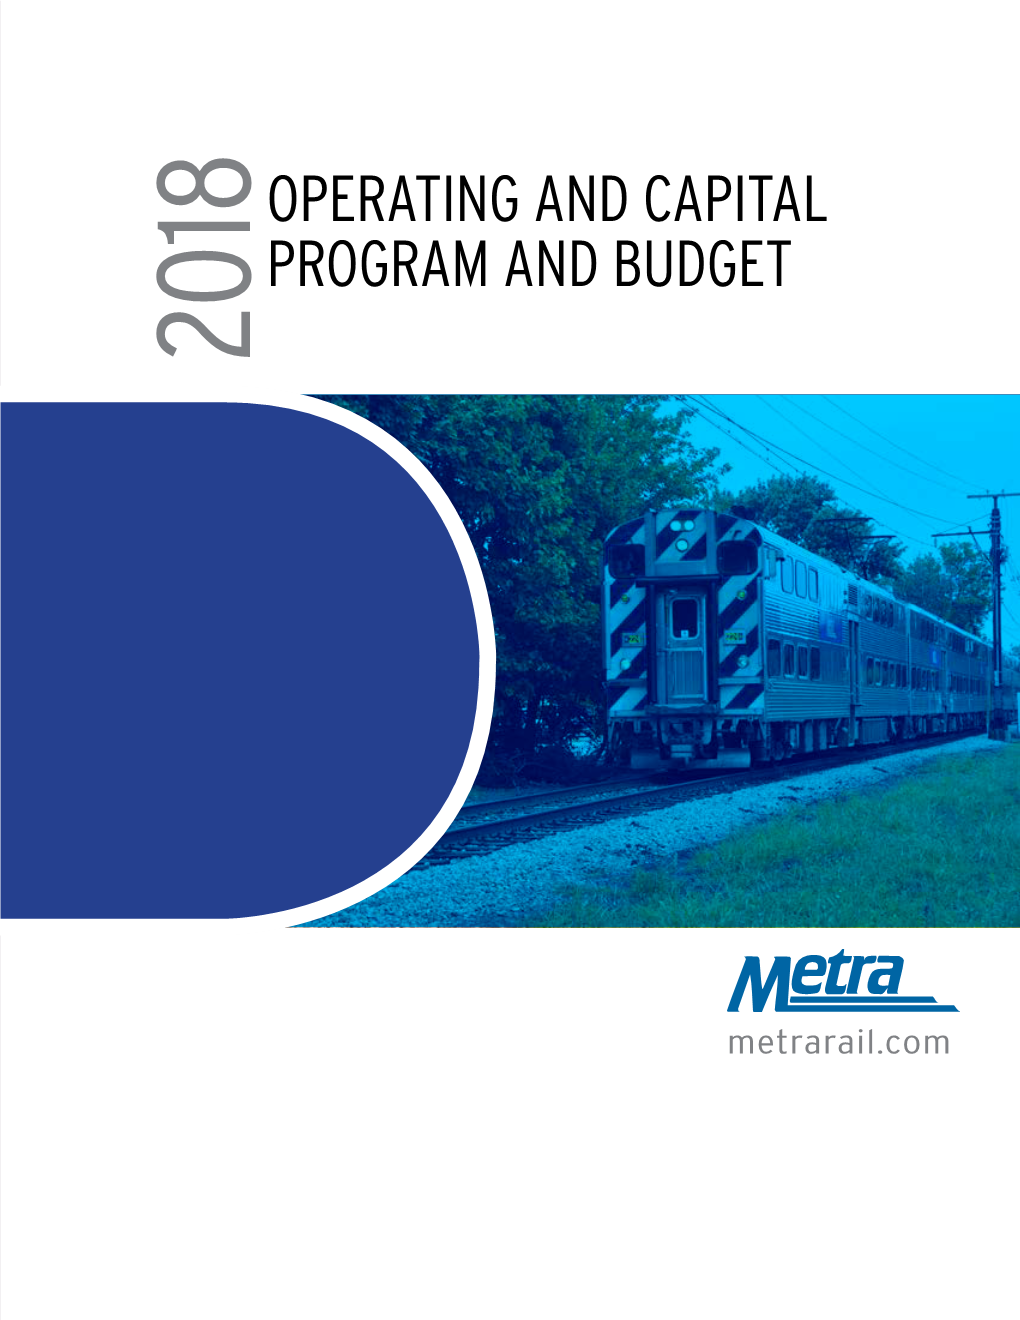 The Full 2018 Operating and Capital Program and Budget Book